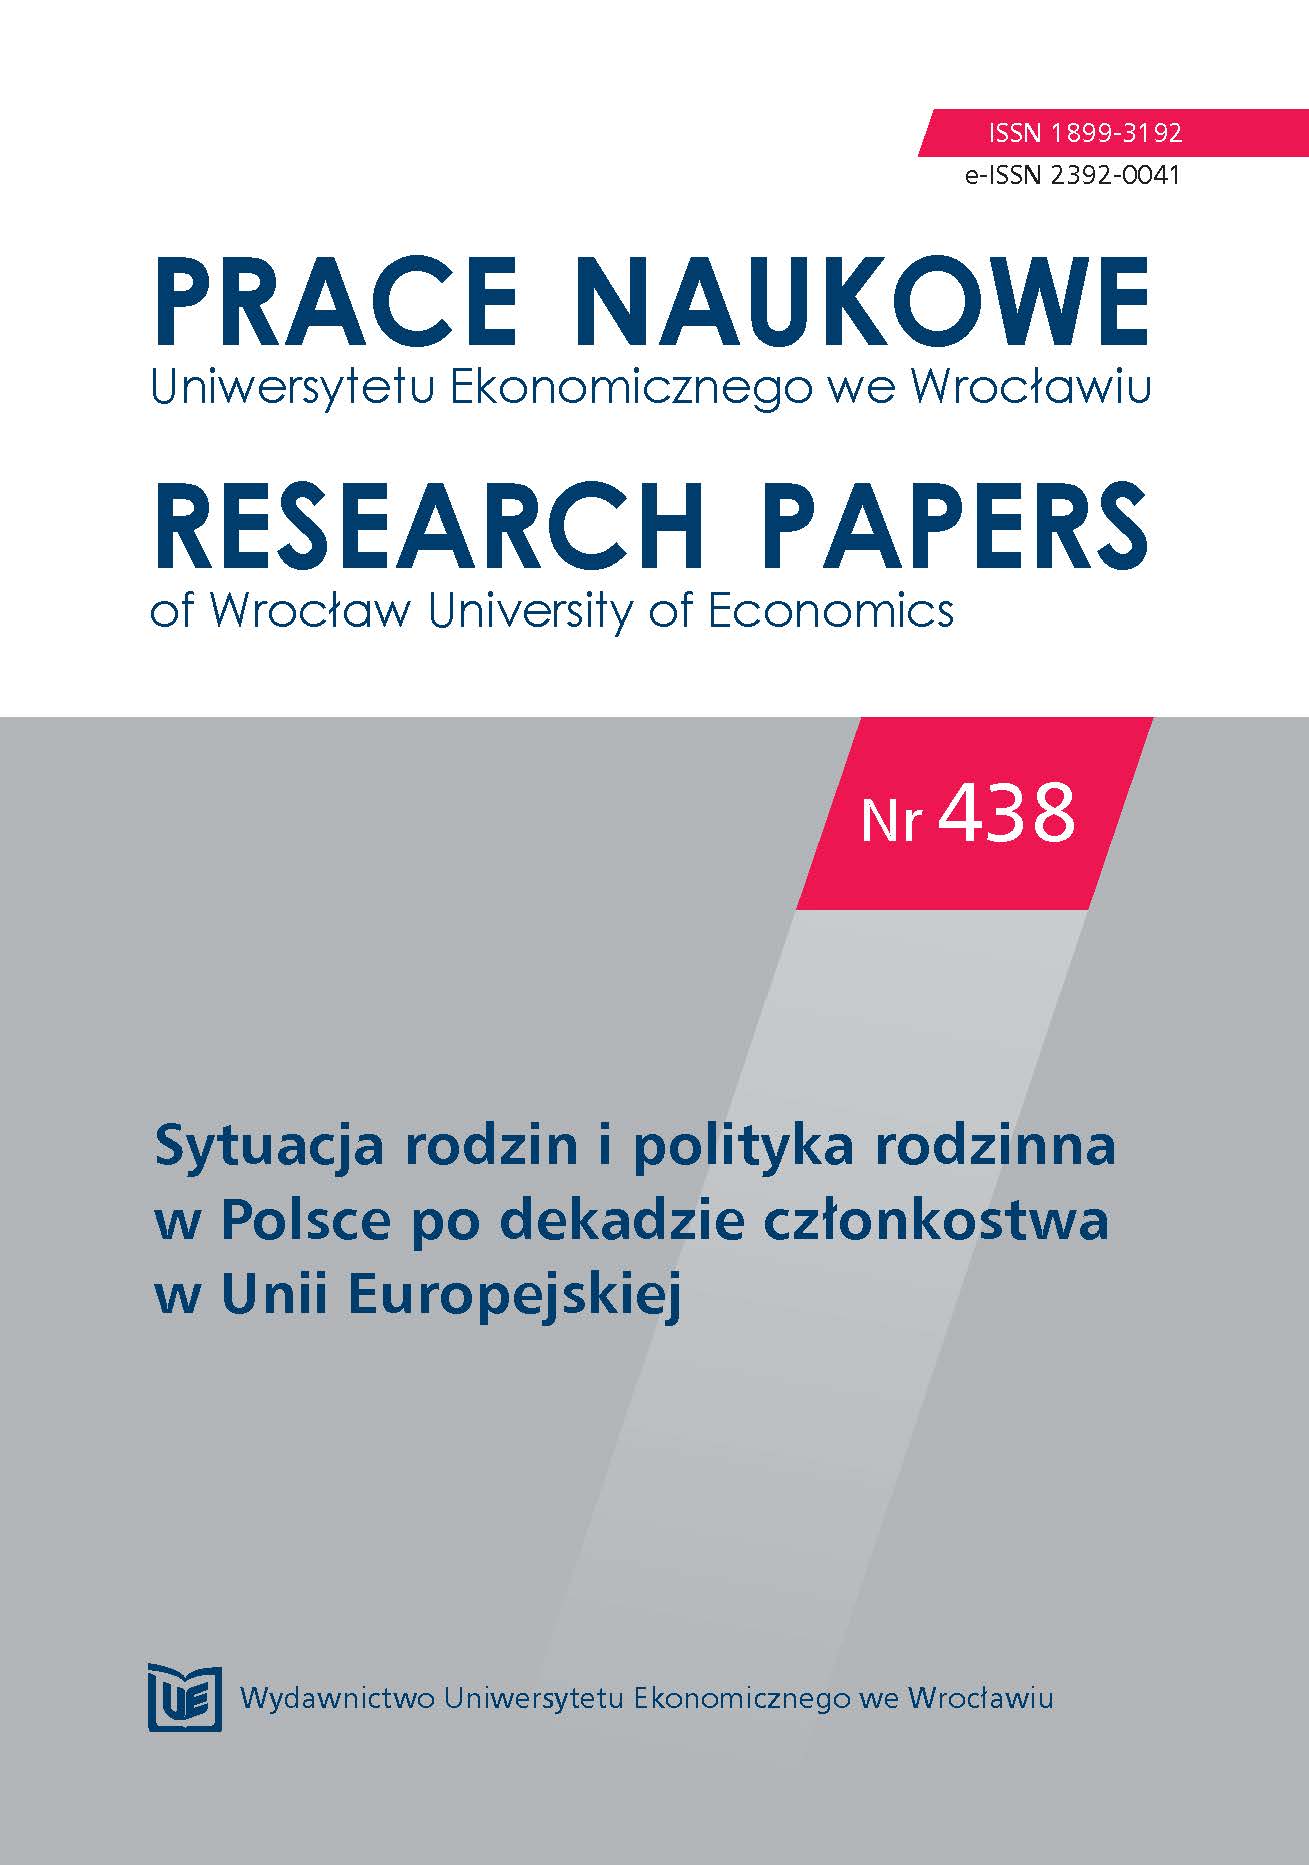 The modernization of welfare state and social innovations on the example of the Swedish family policy - chances of initiating in Poland Cover Image